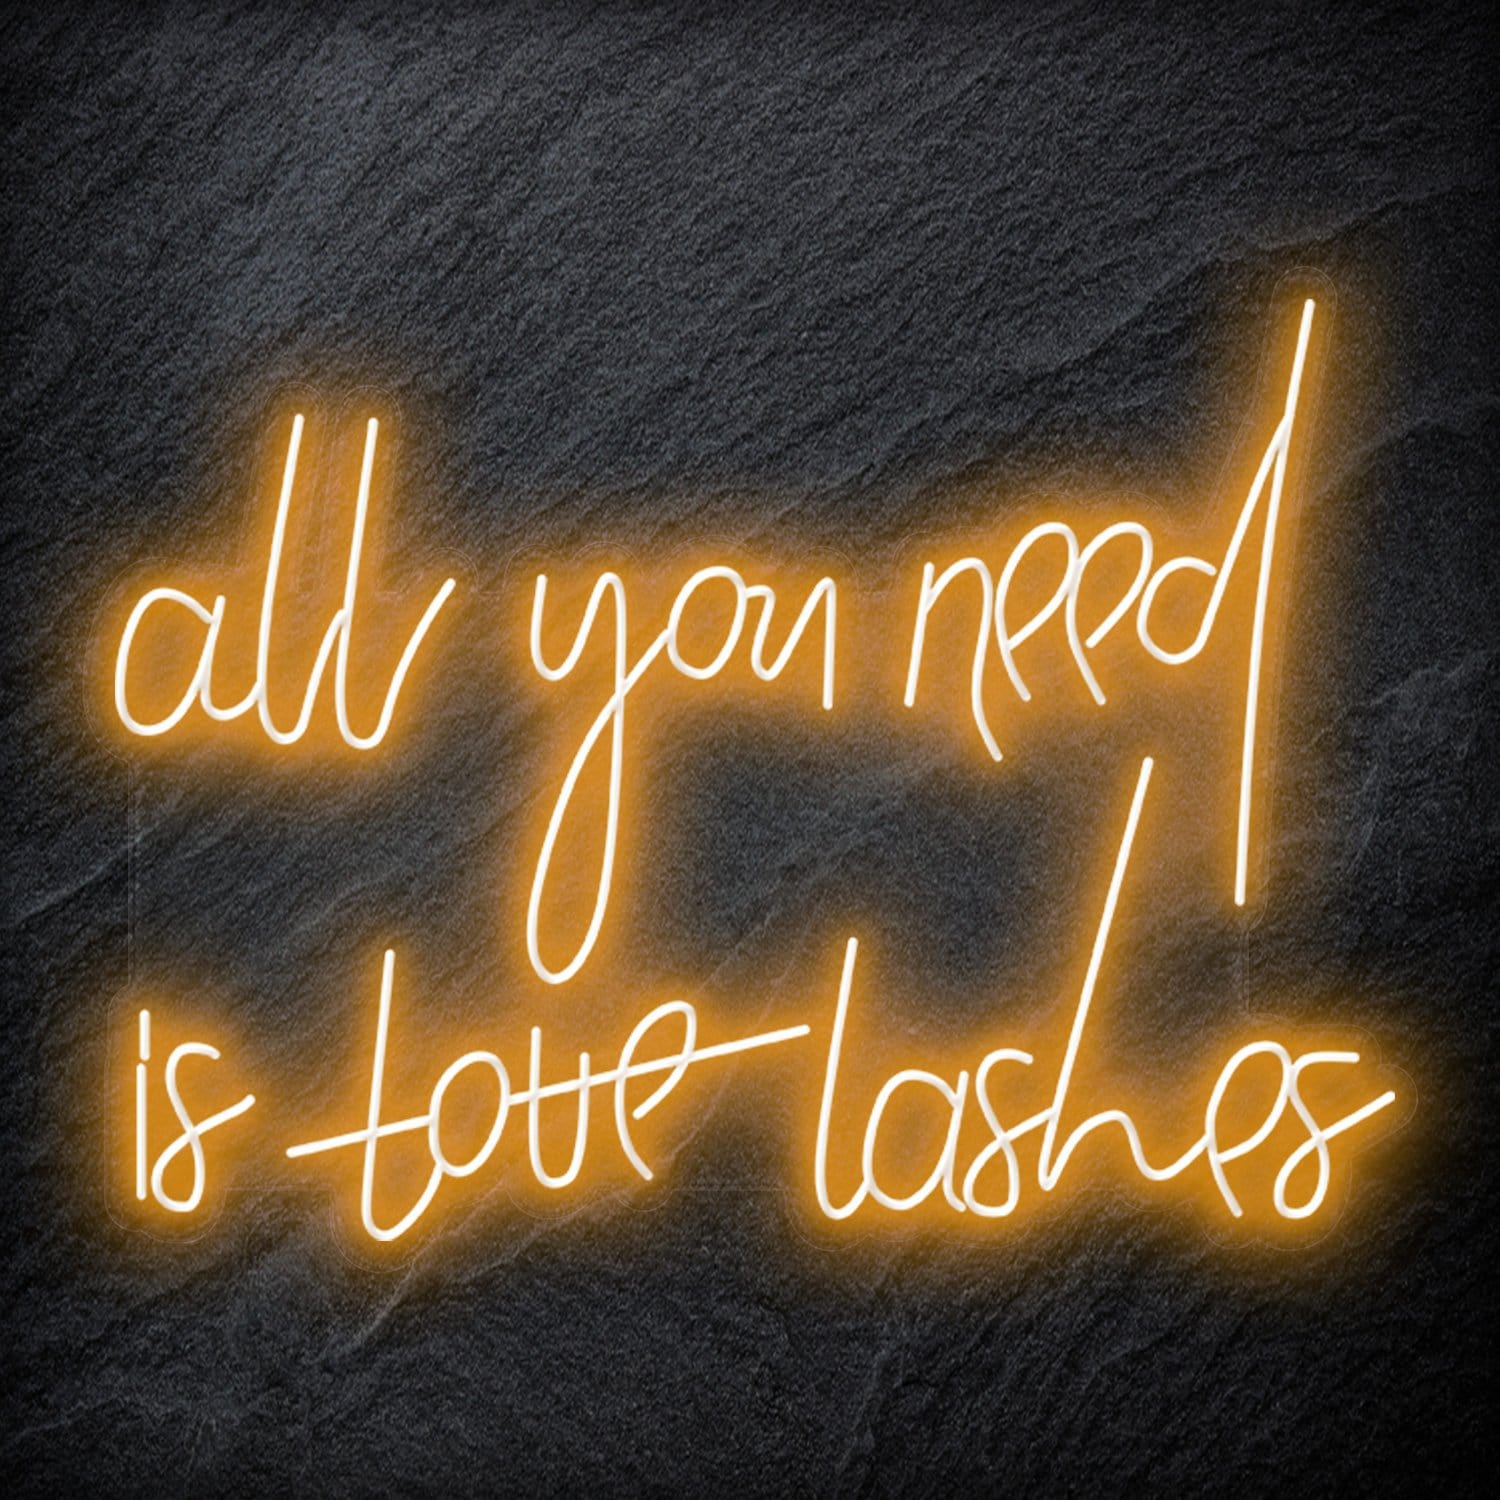 "All You Need is Lashes" LED Neon Schriftzug - NEONEVERGLOW